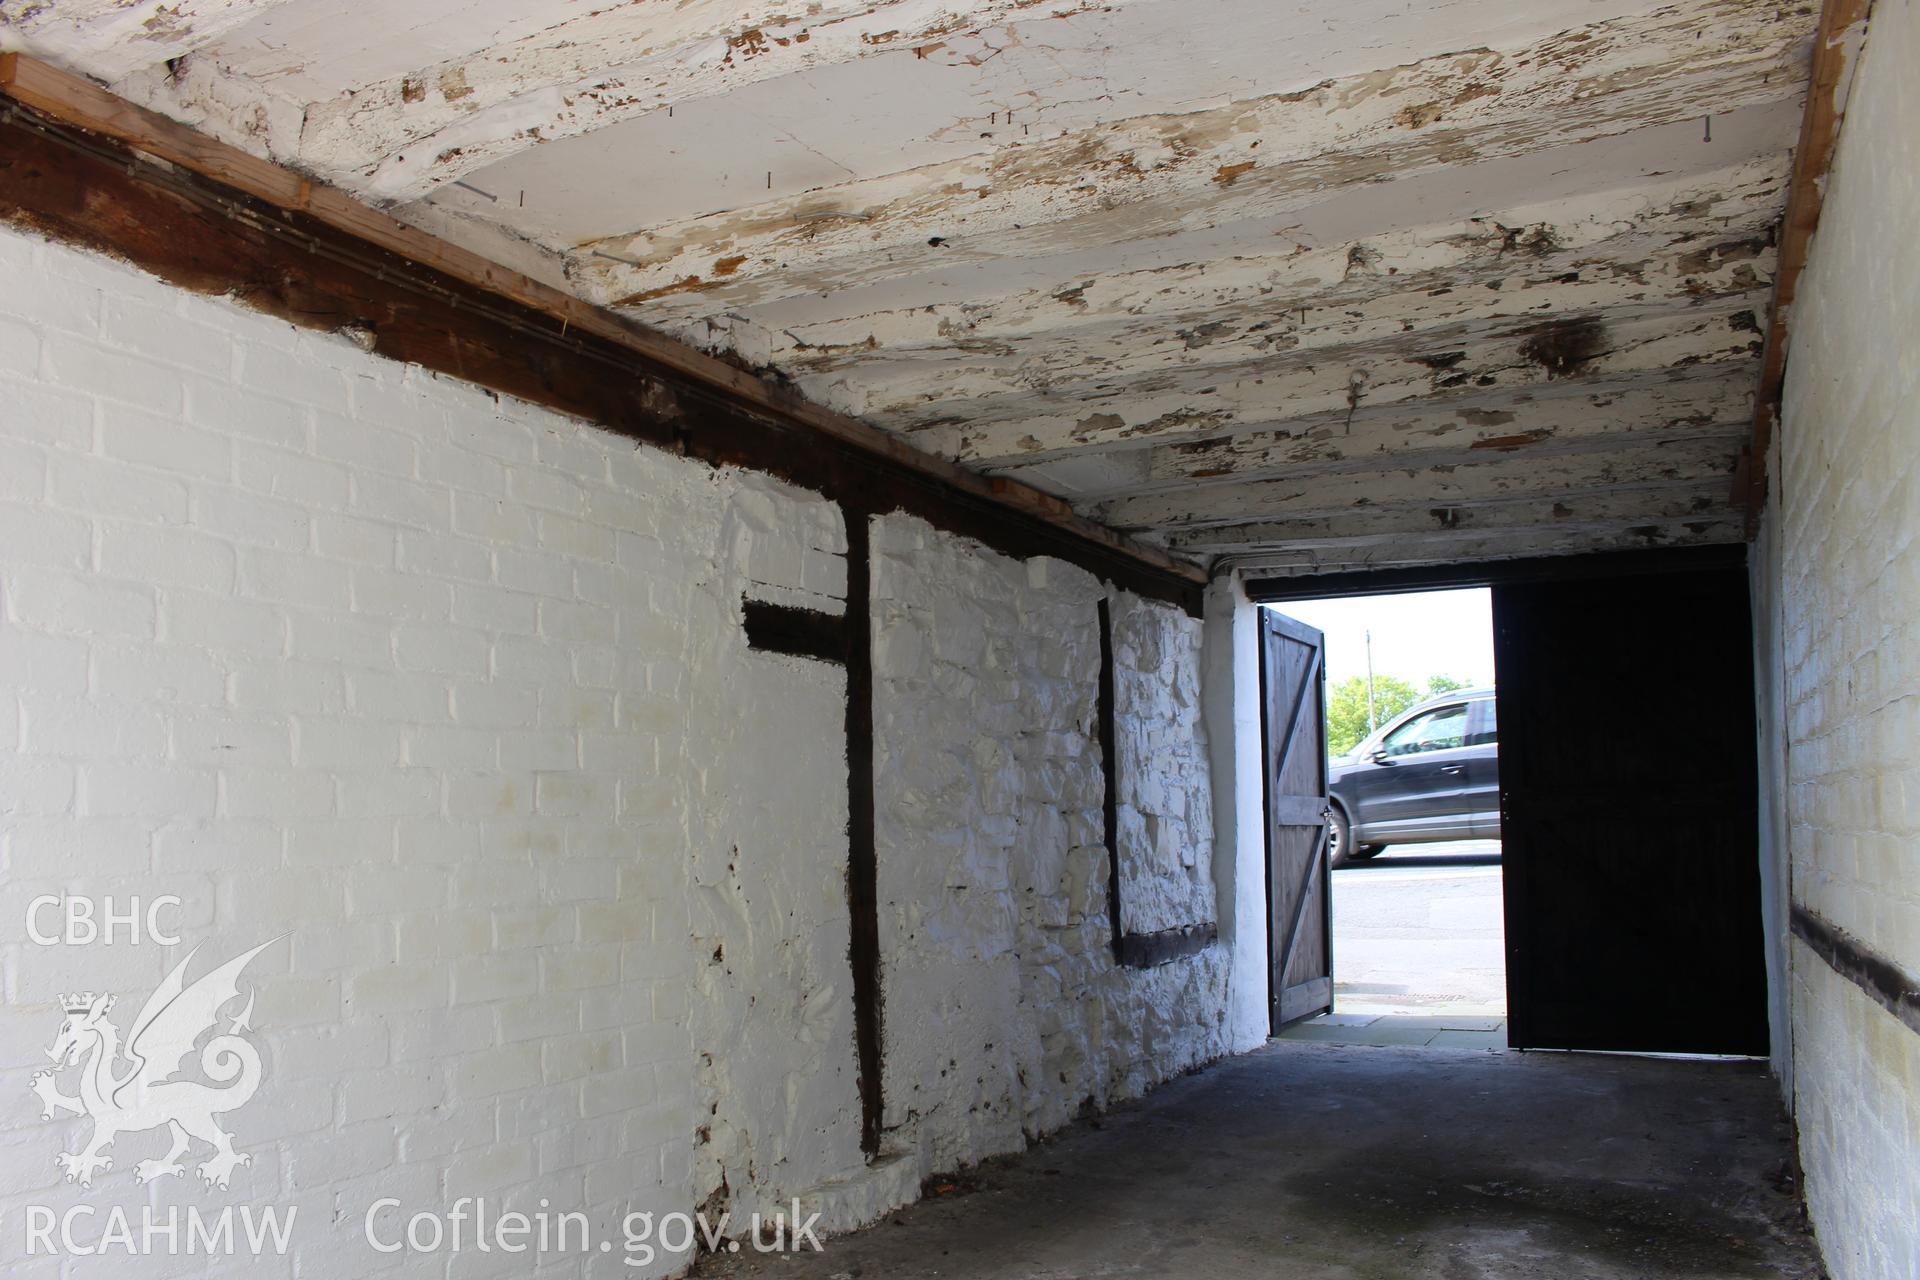 Colour photograph showing interior view of external covered vehicular opening on left of No 5 Mwrog Street, Ruthin. Photographed during survey conducted by Geoff Ward on 14th May 2014.